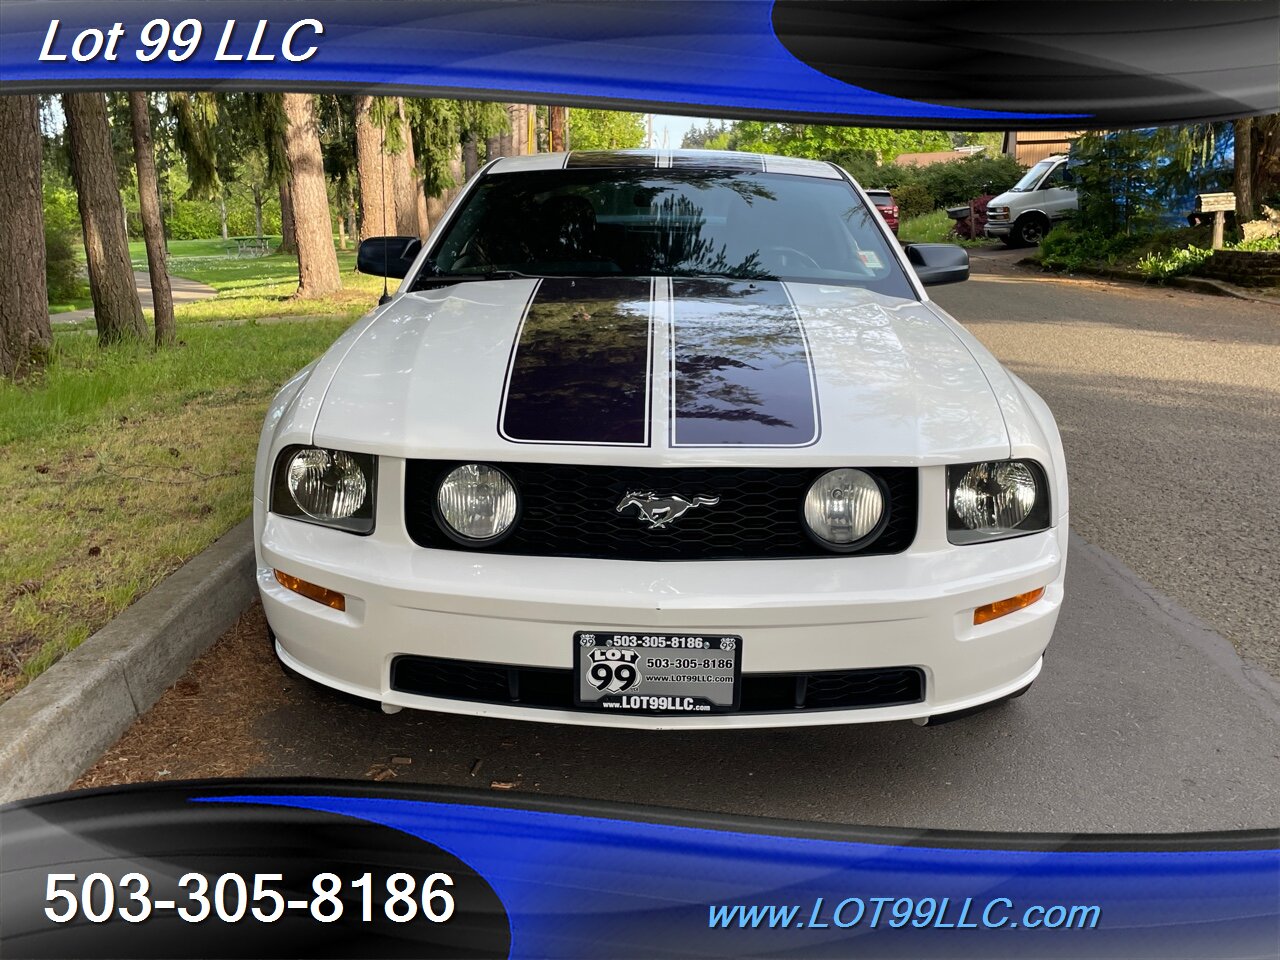 2005 Ford Mustang GT Deluxe 4.6L V8 5 Speed Manual Leather Purple Ra   - Photo 4 - Milwaukie, OR 97267